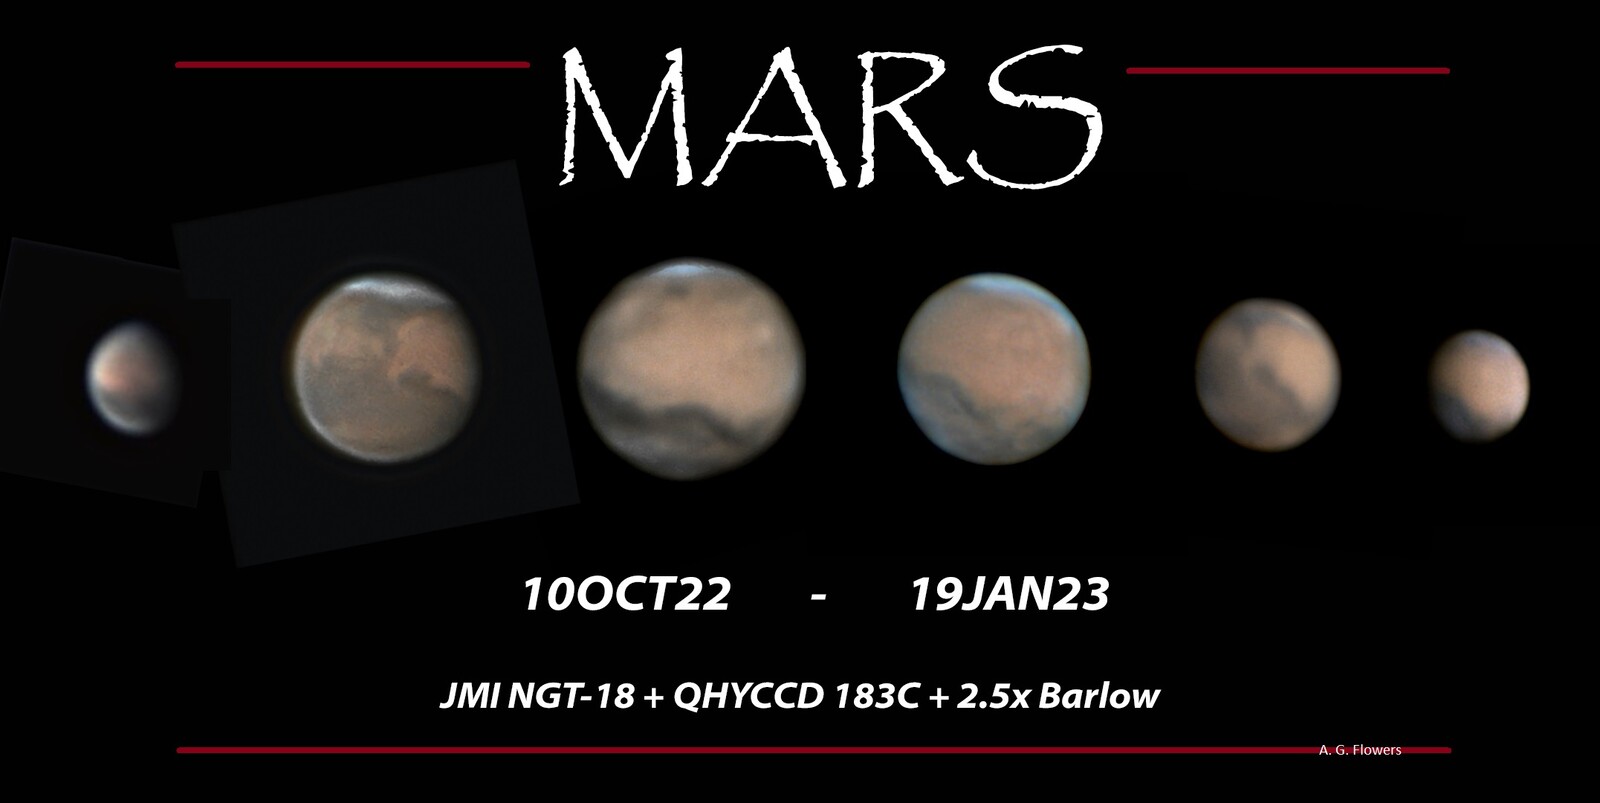 2022 - 2023 Mars Opposition using NGT-18